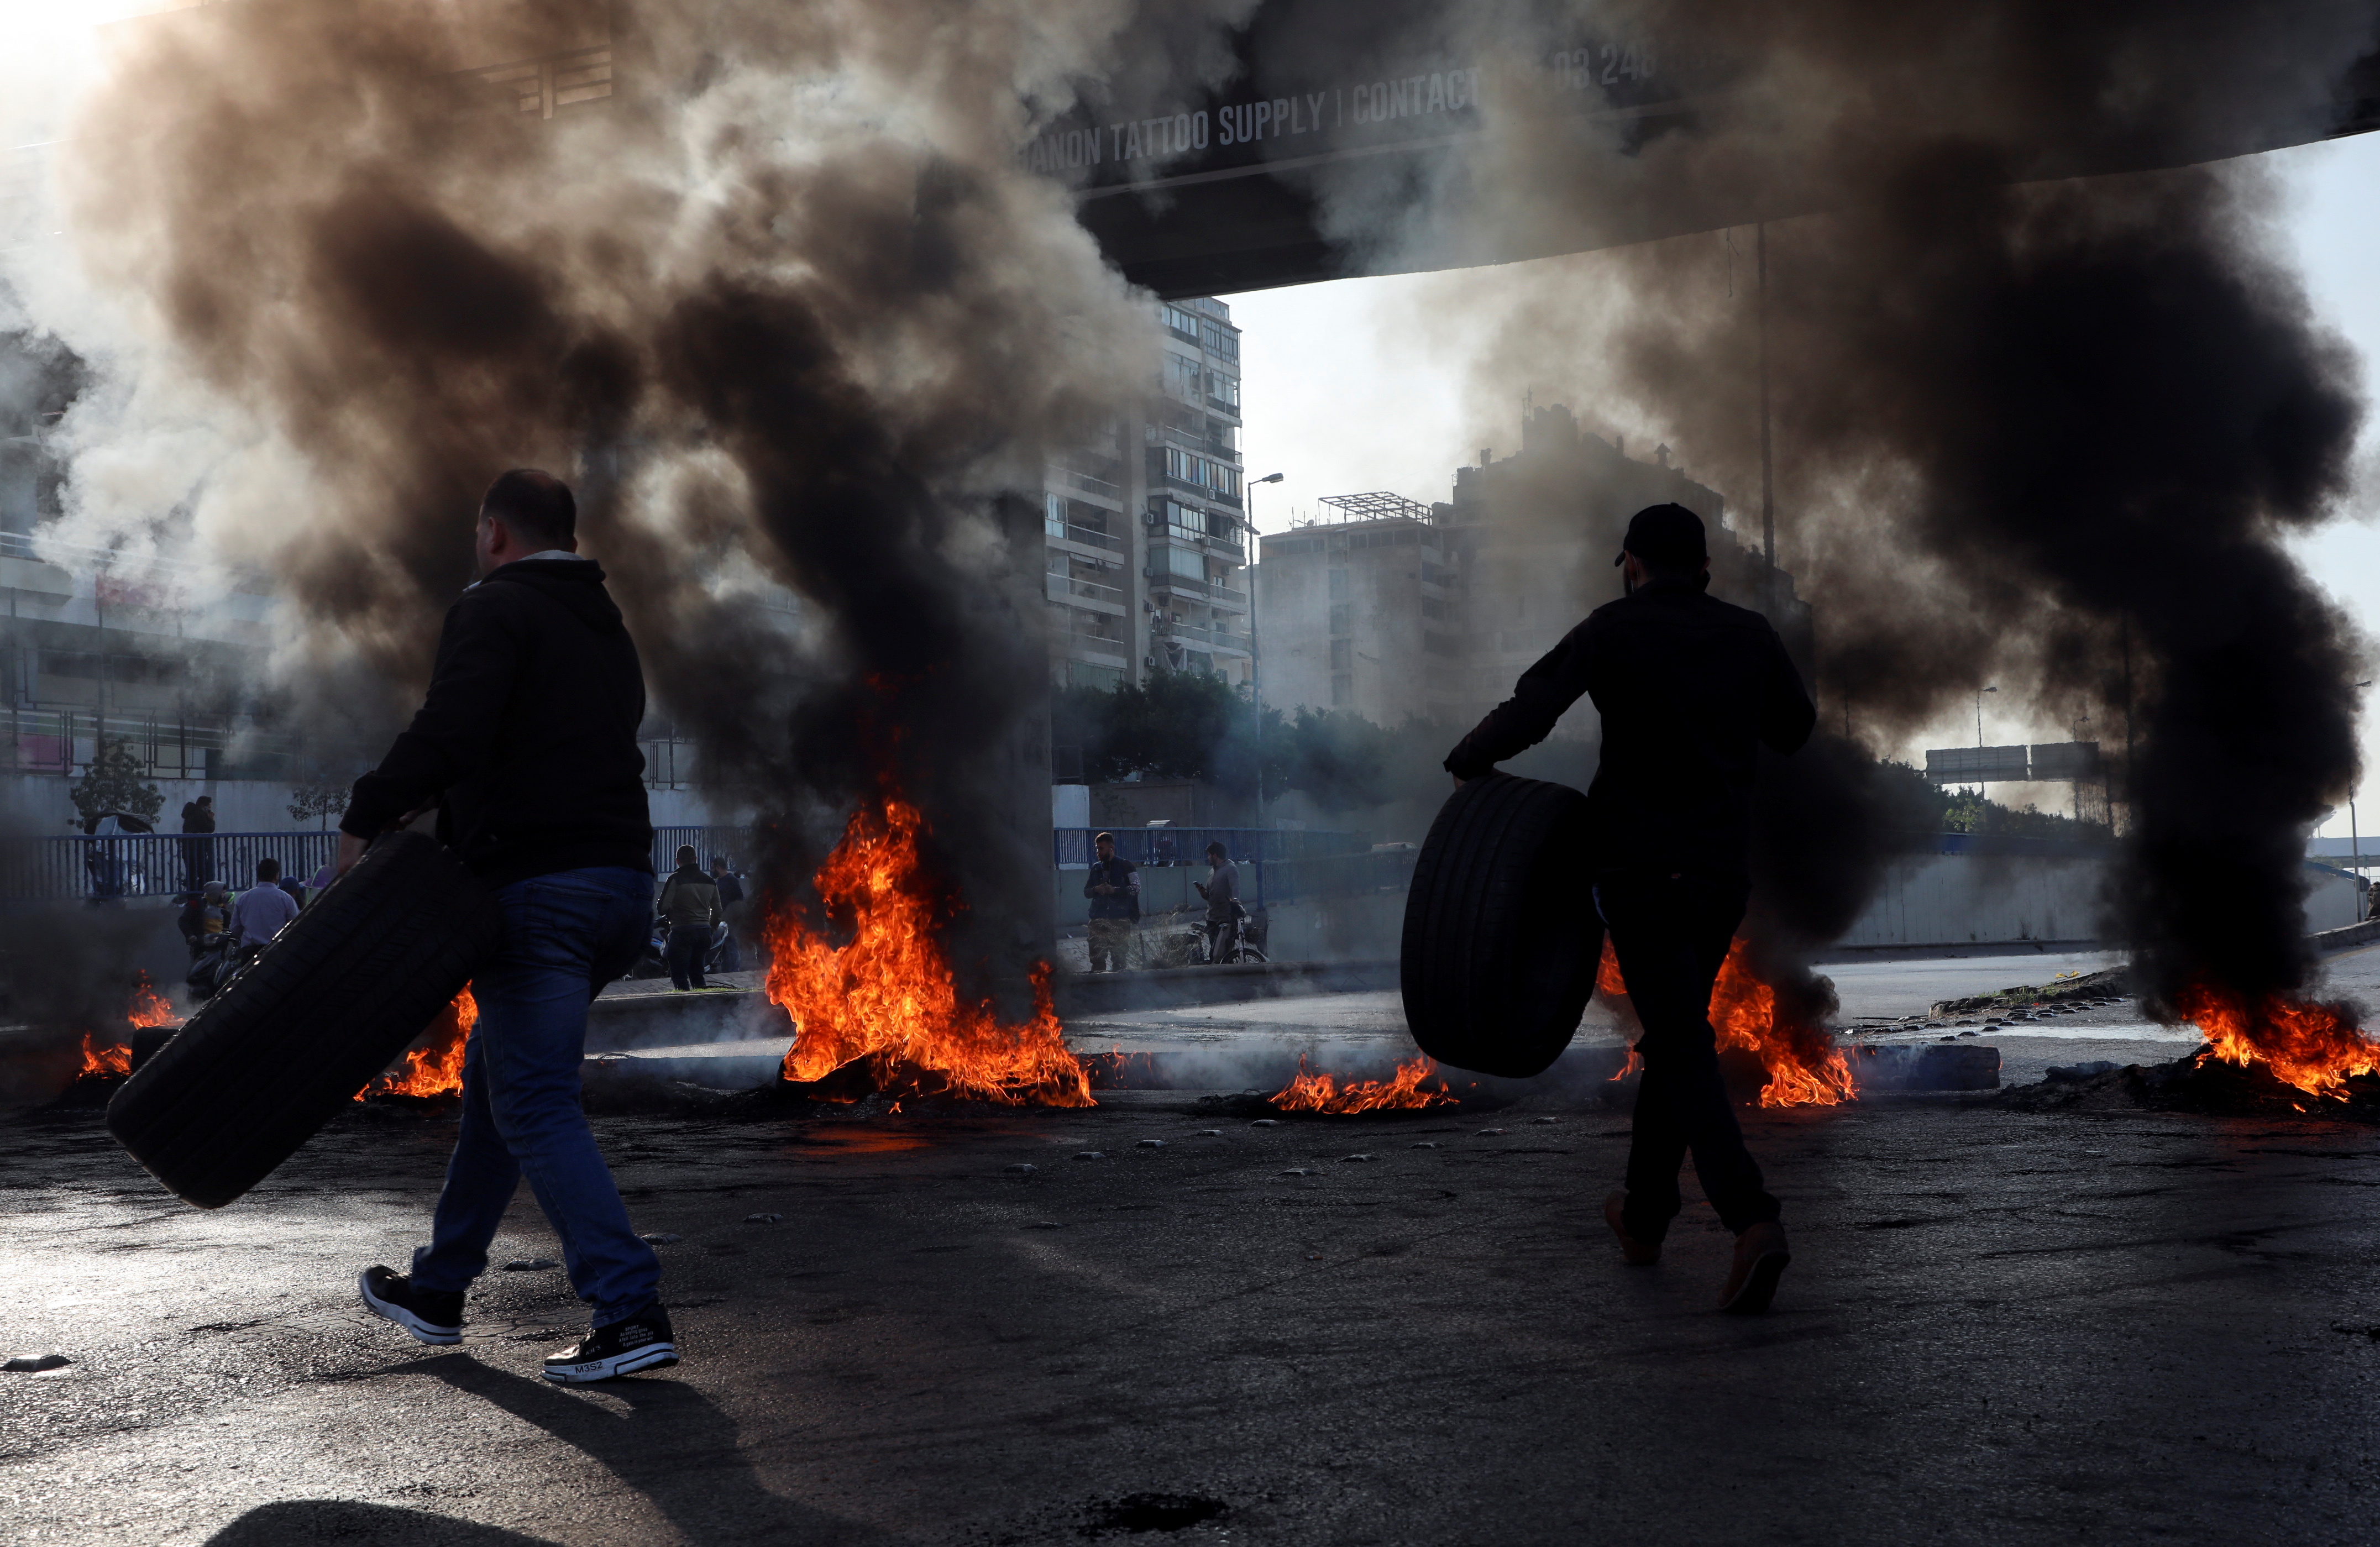 Demonstrators block a road with burning tires during a protest in Beirut